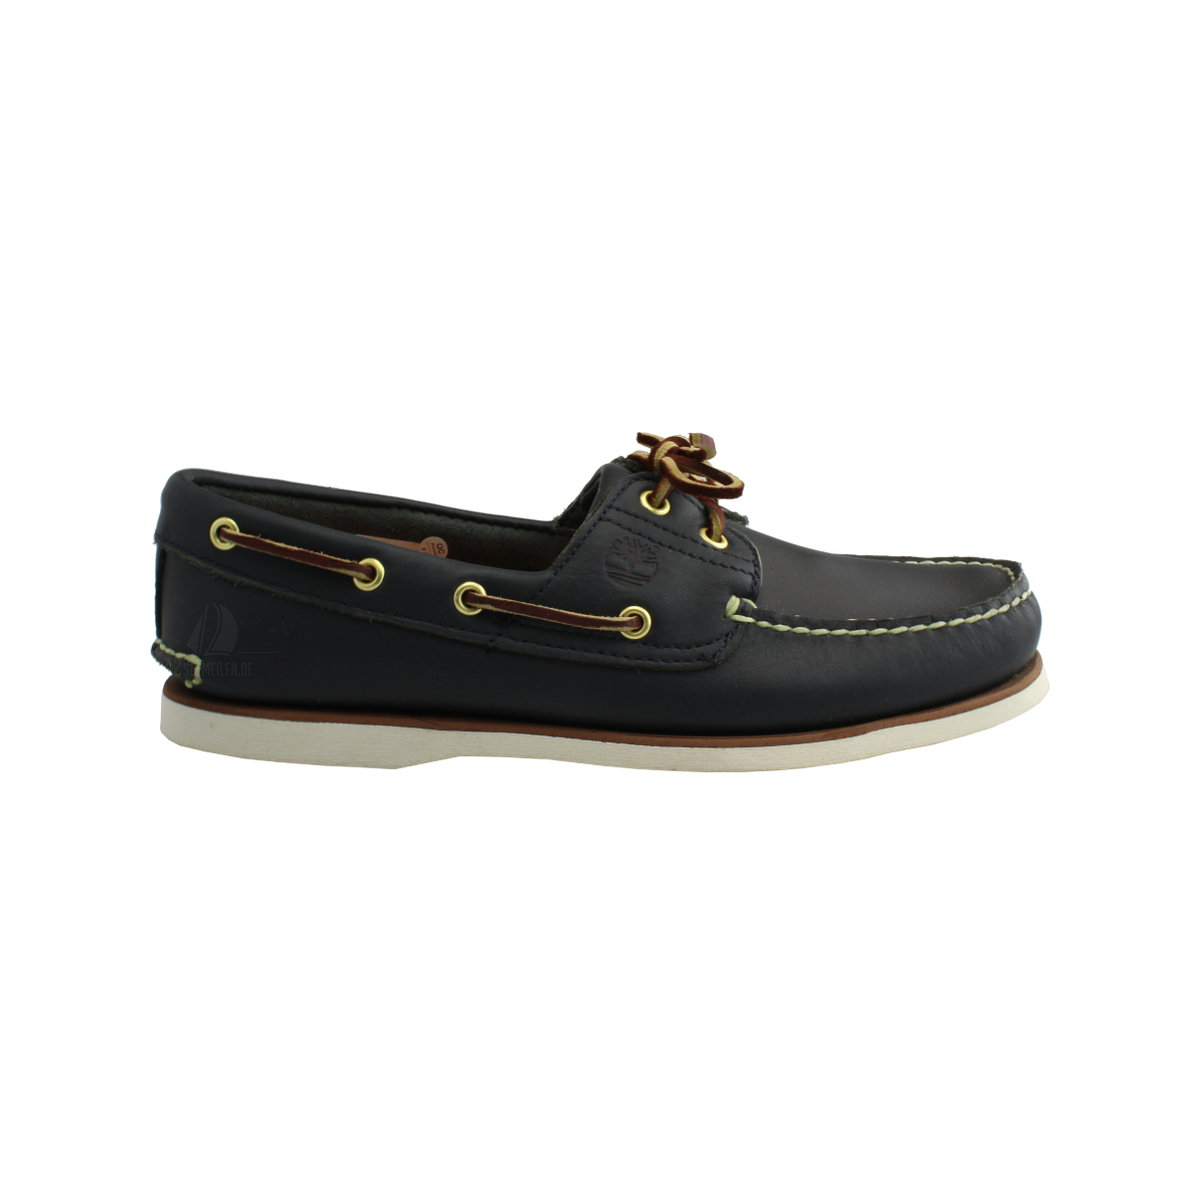 Timberland Classic Boat chaussures bateau homme navy eu 41,5 ( us 8 )